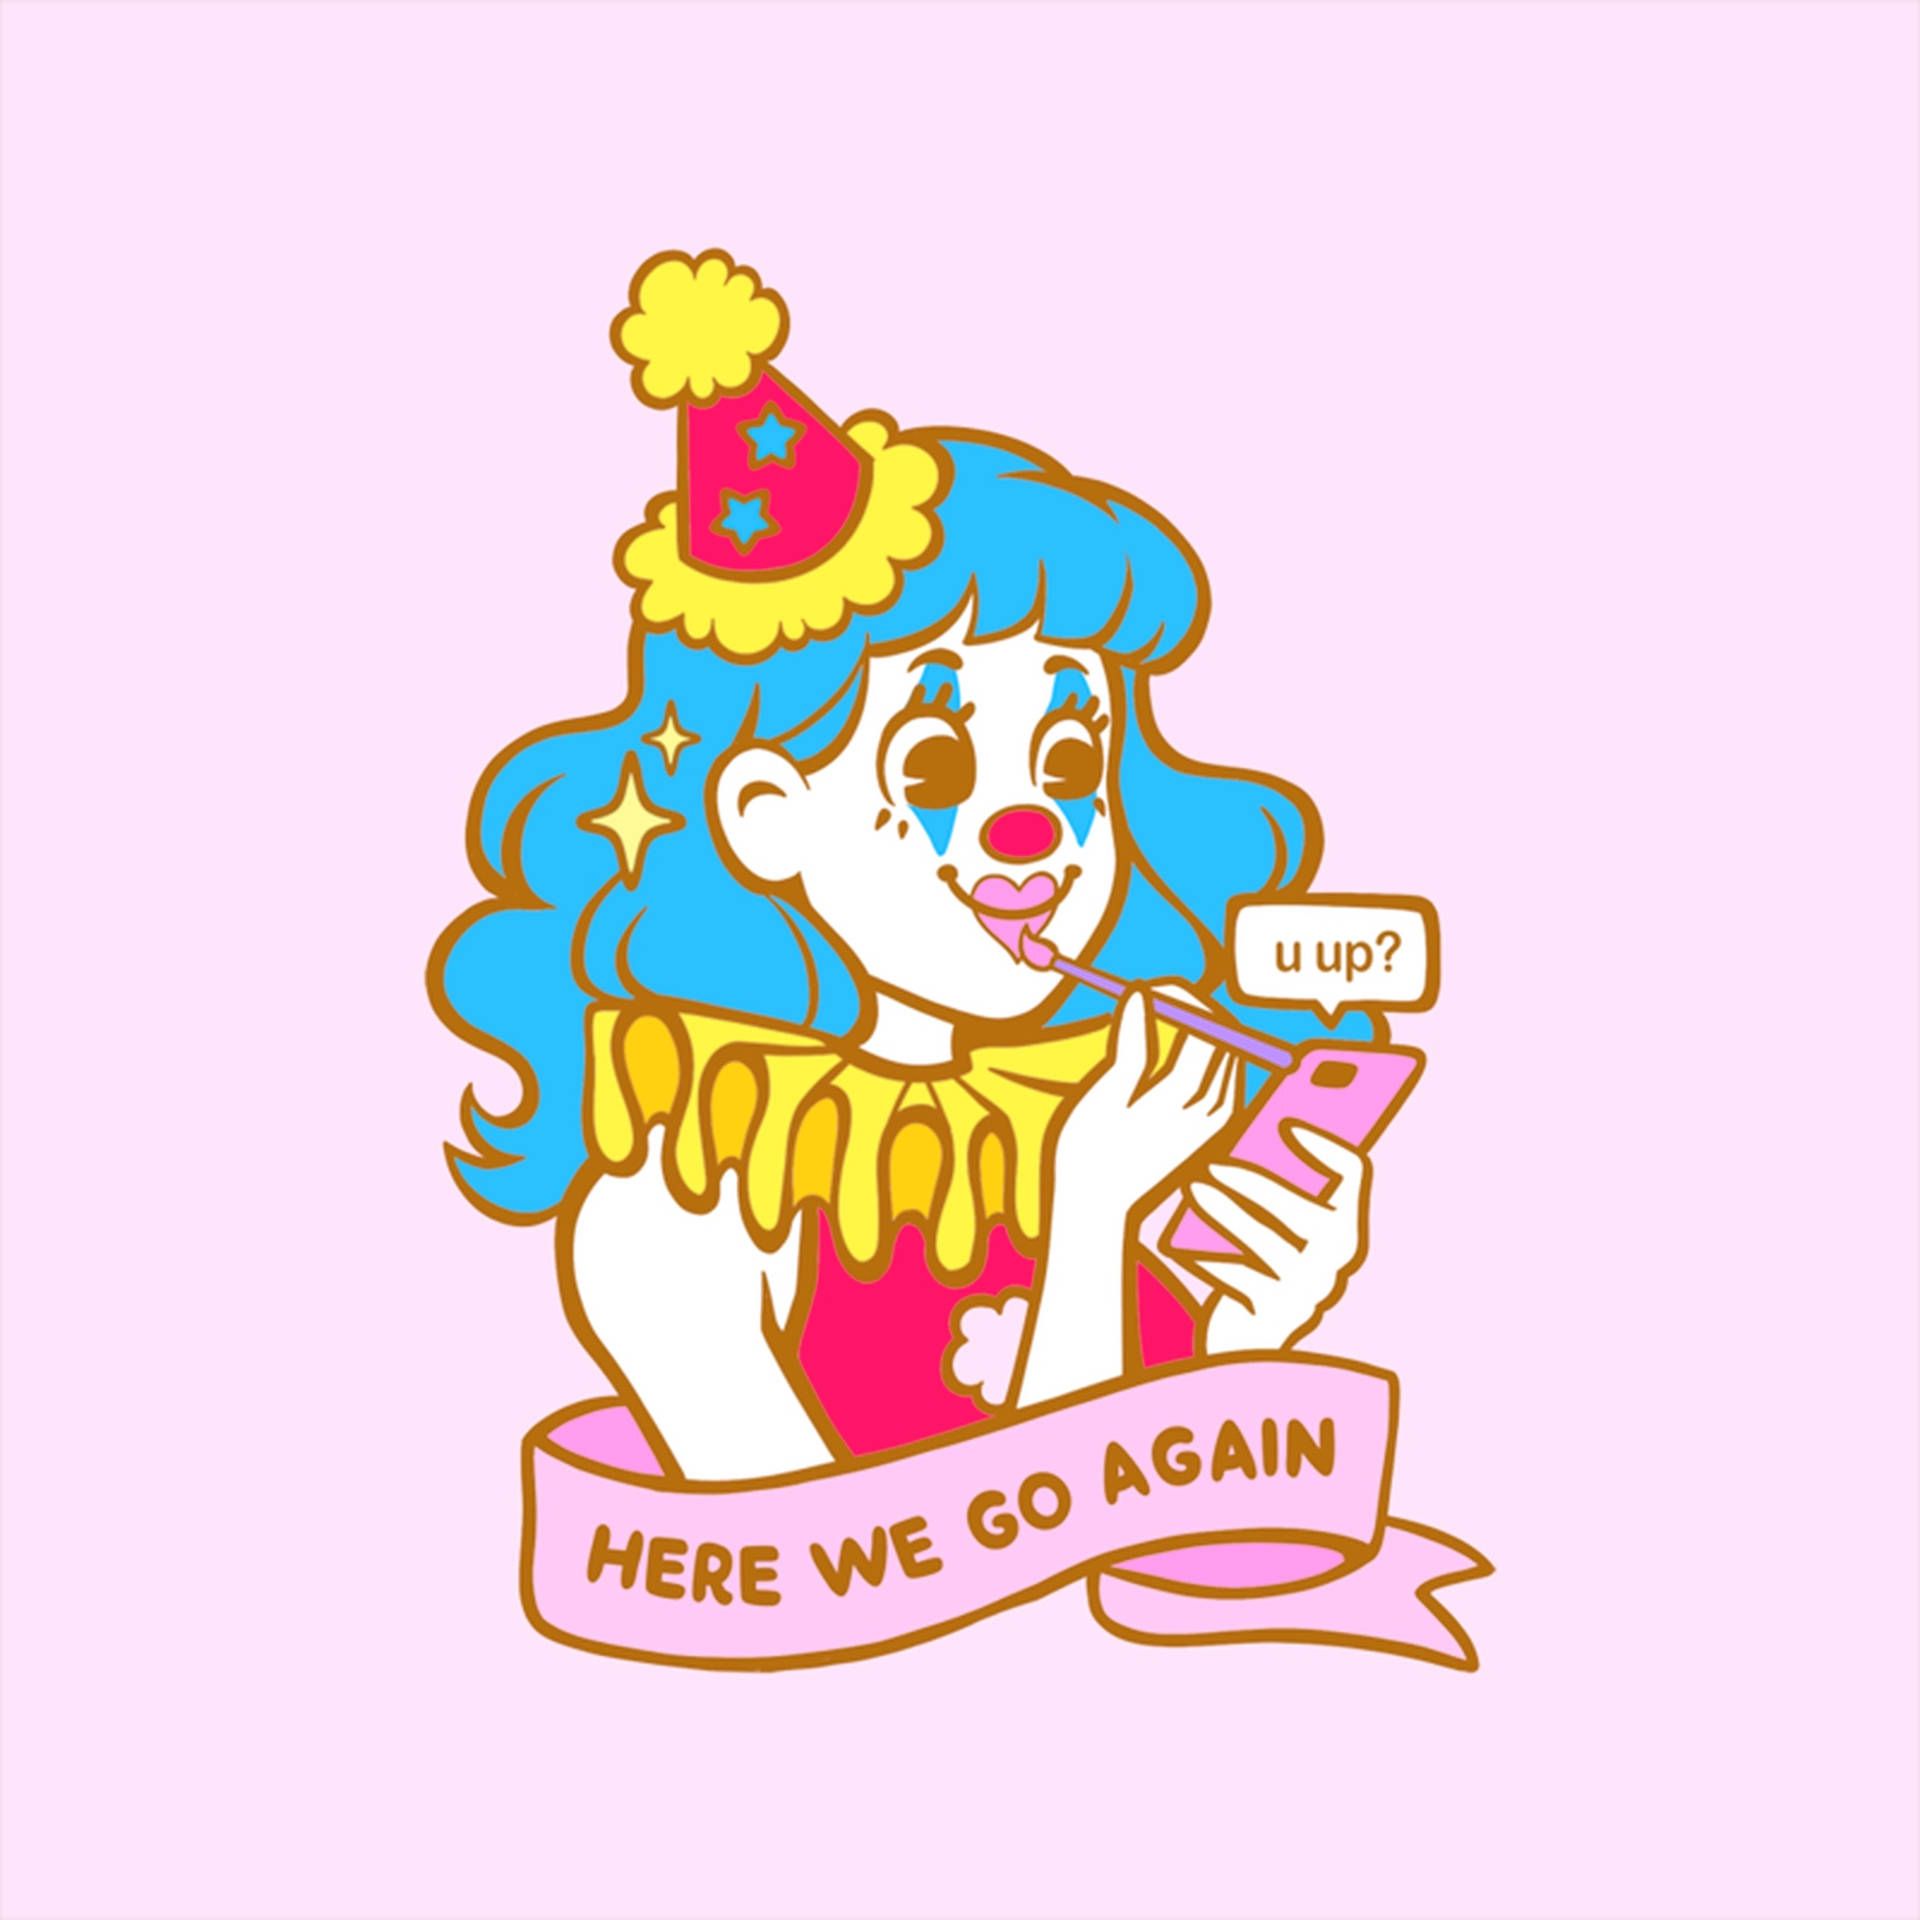 A cartoon illustration of a blue-haired woman in a party hat, holding a phone and a speech bubble that says 